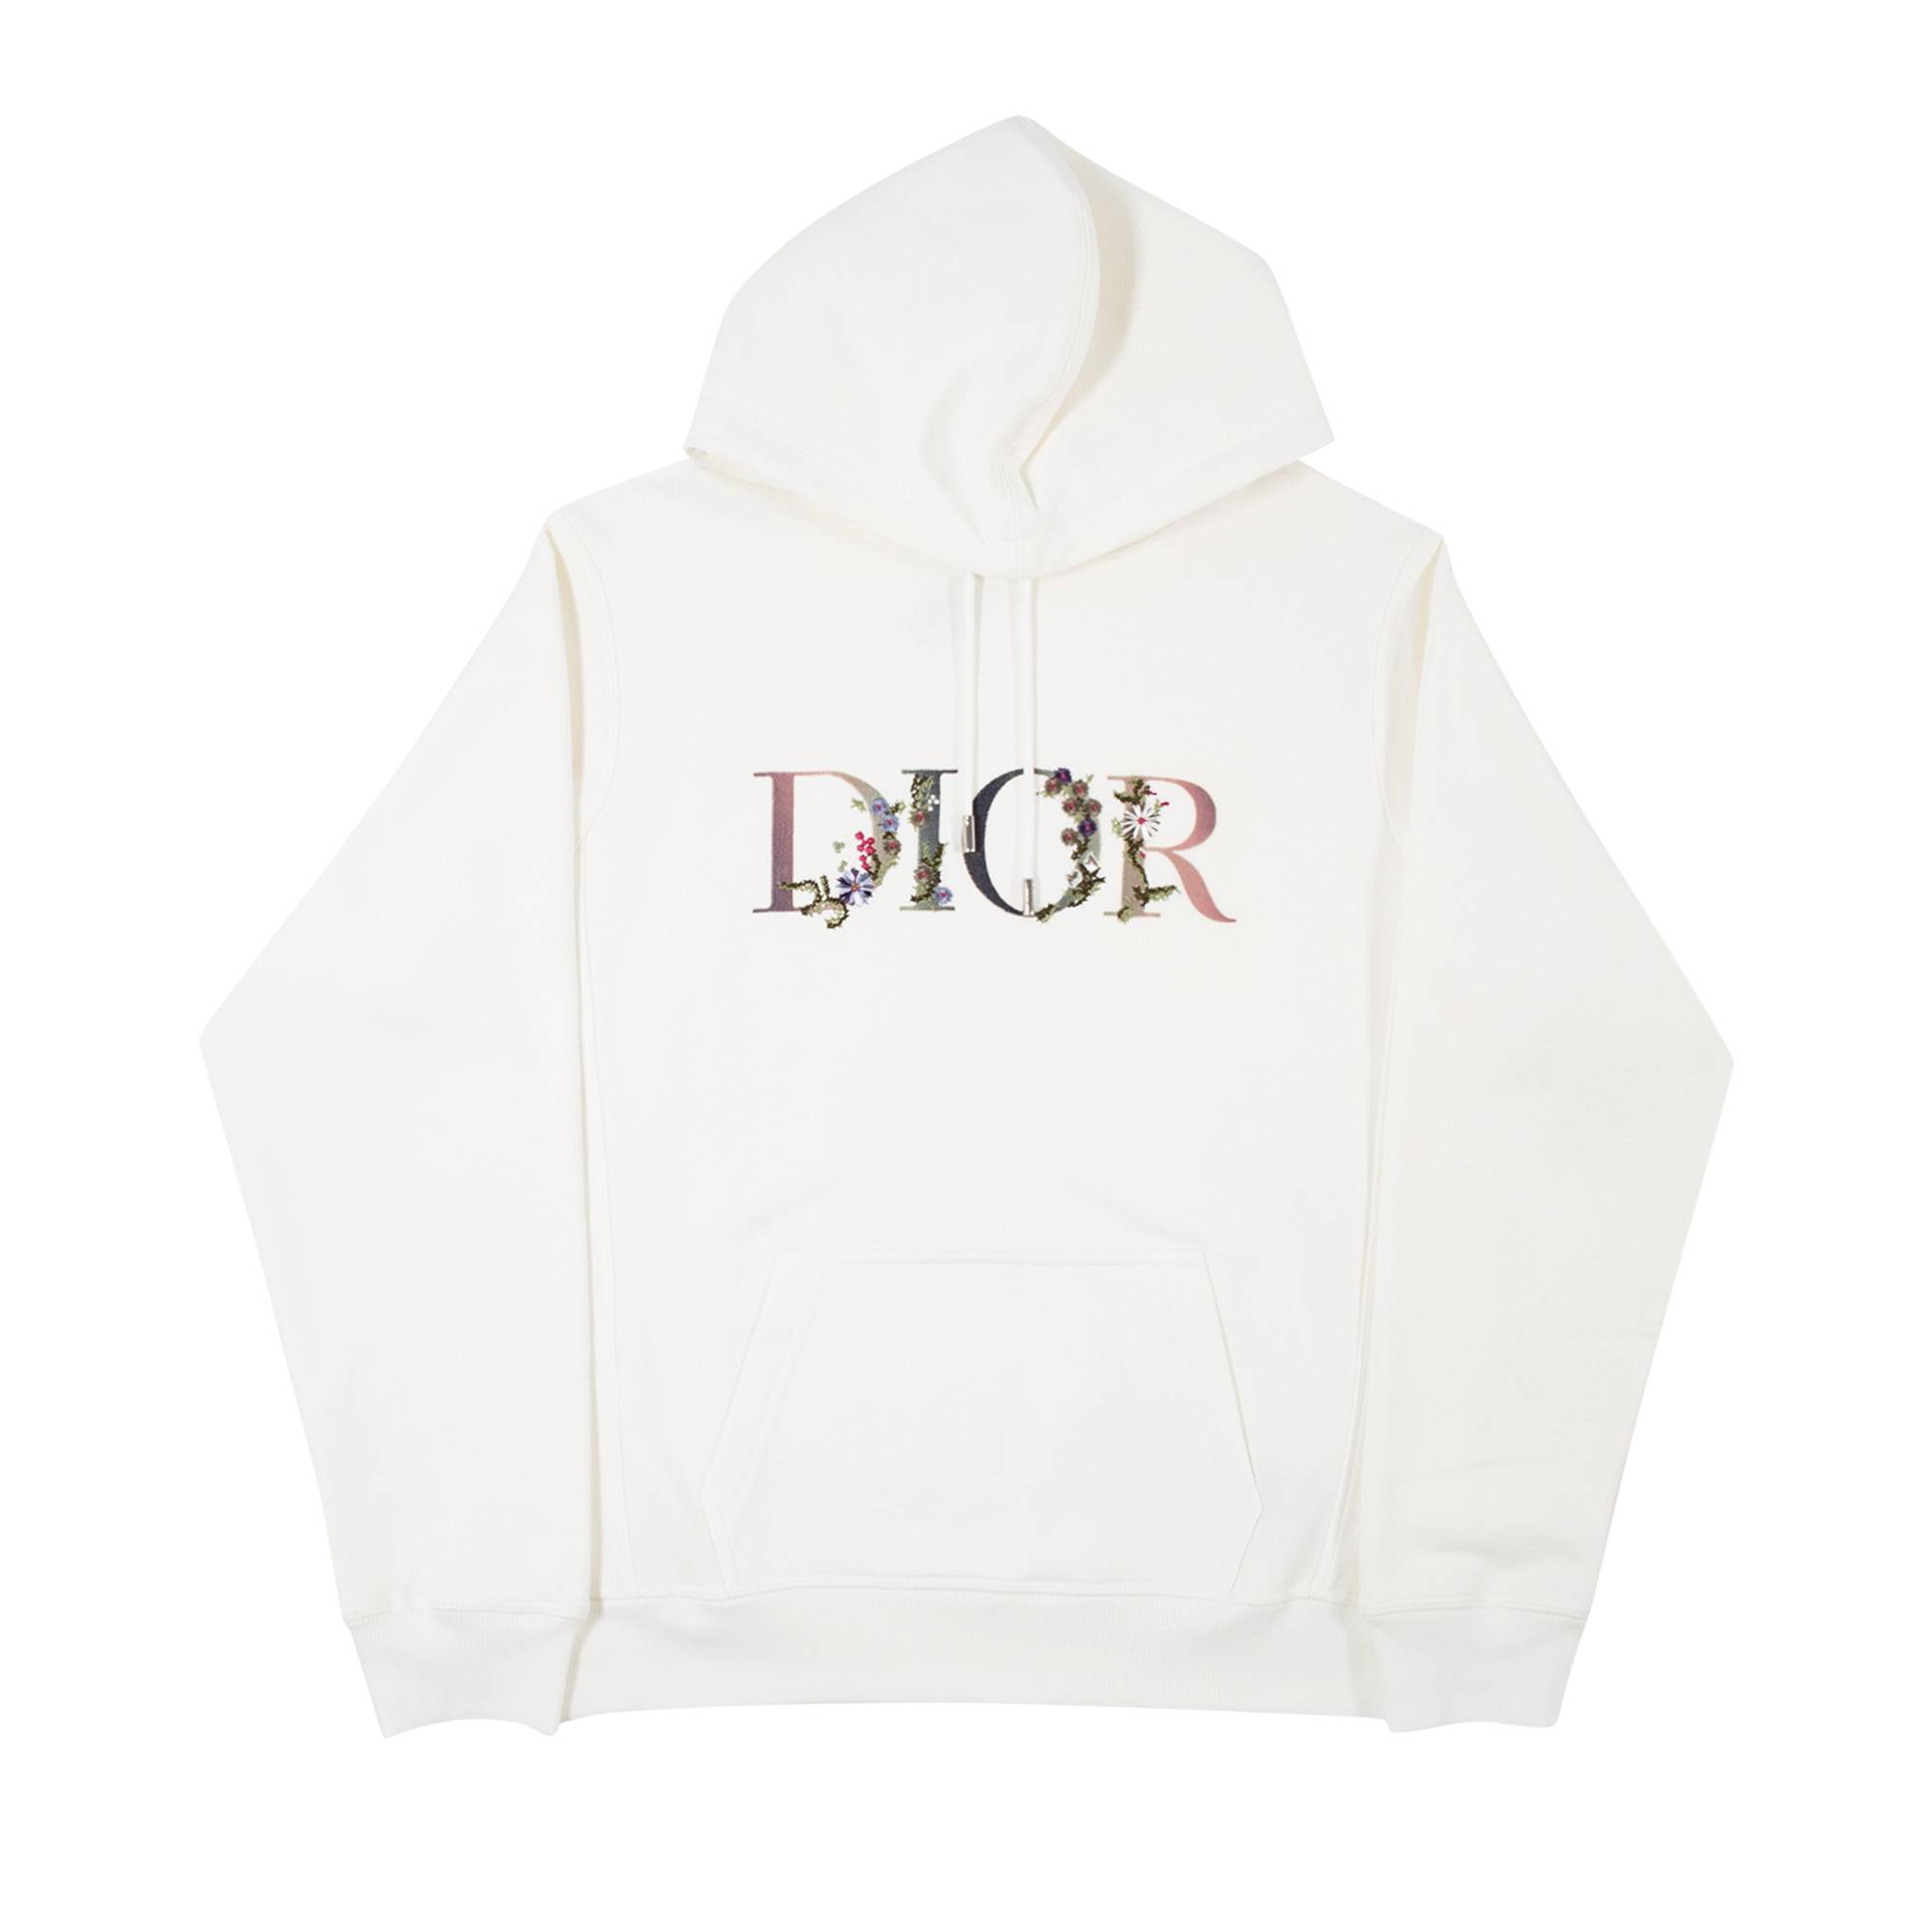 Dior Flowers Embroidered Hoodie 'White' - Dior - 113J688A0531 C084 | GOAT